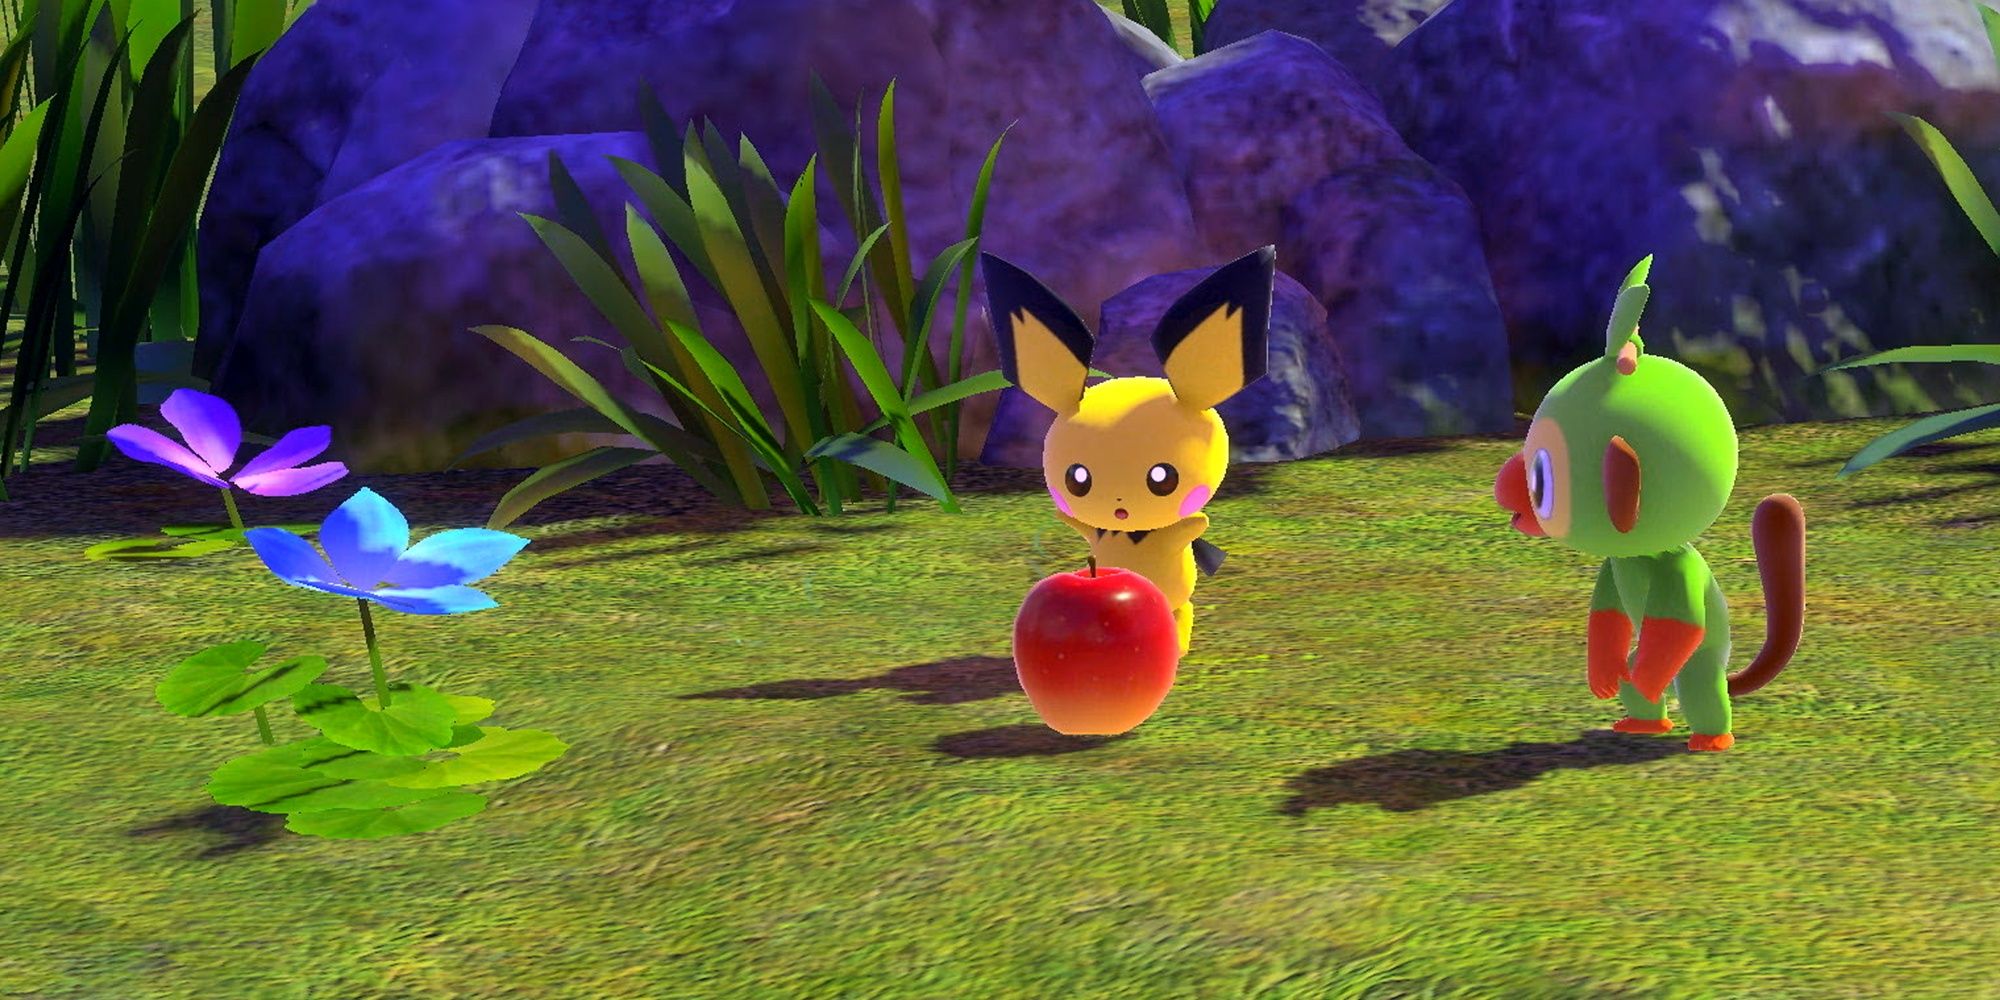 Pichu and Grooky hanging out in New Pokemon Snap